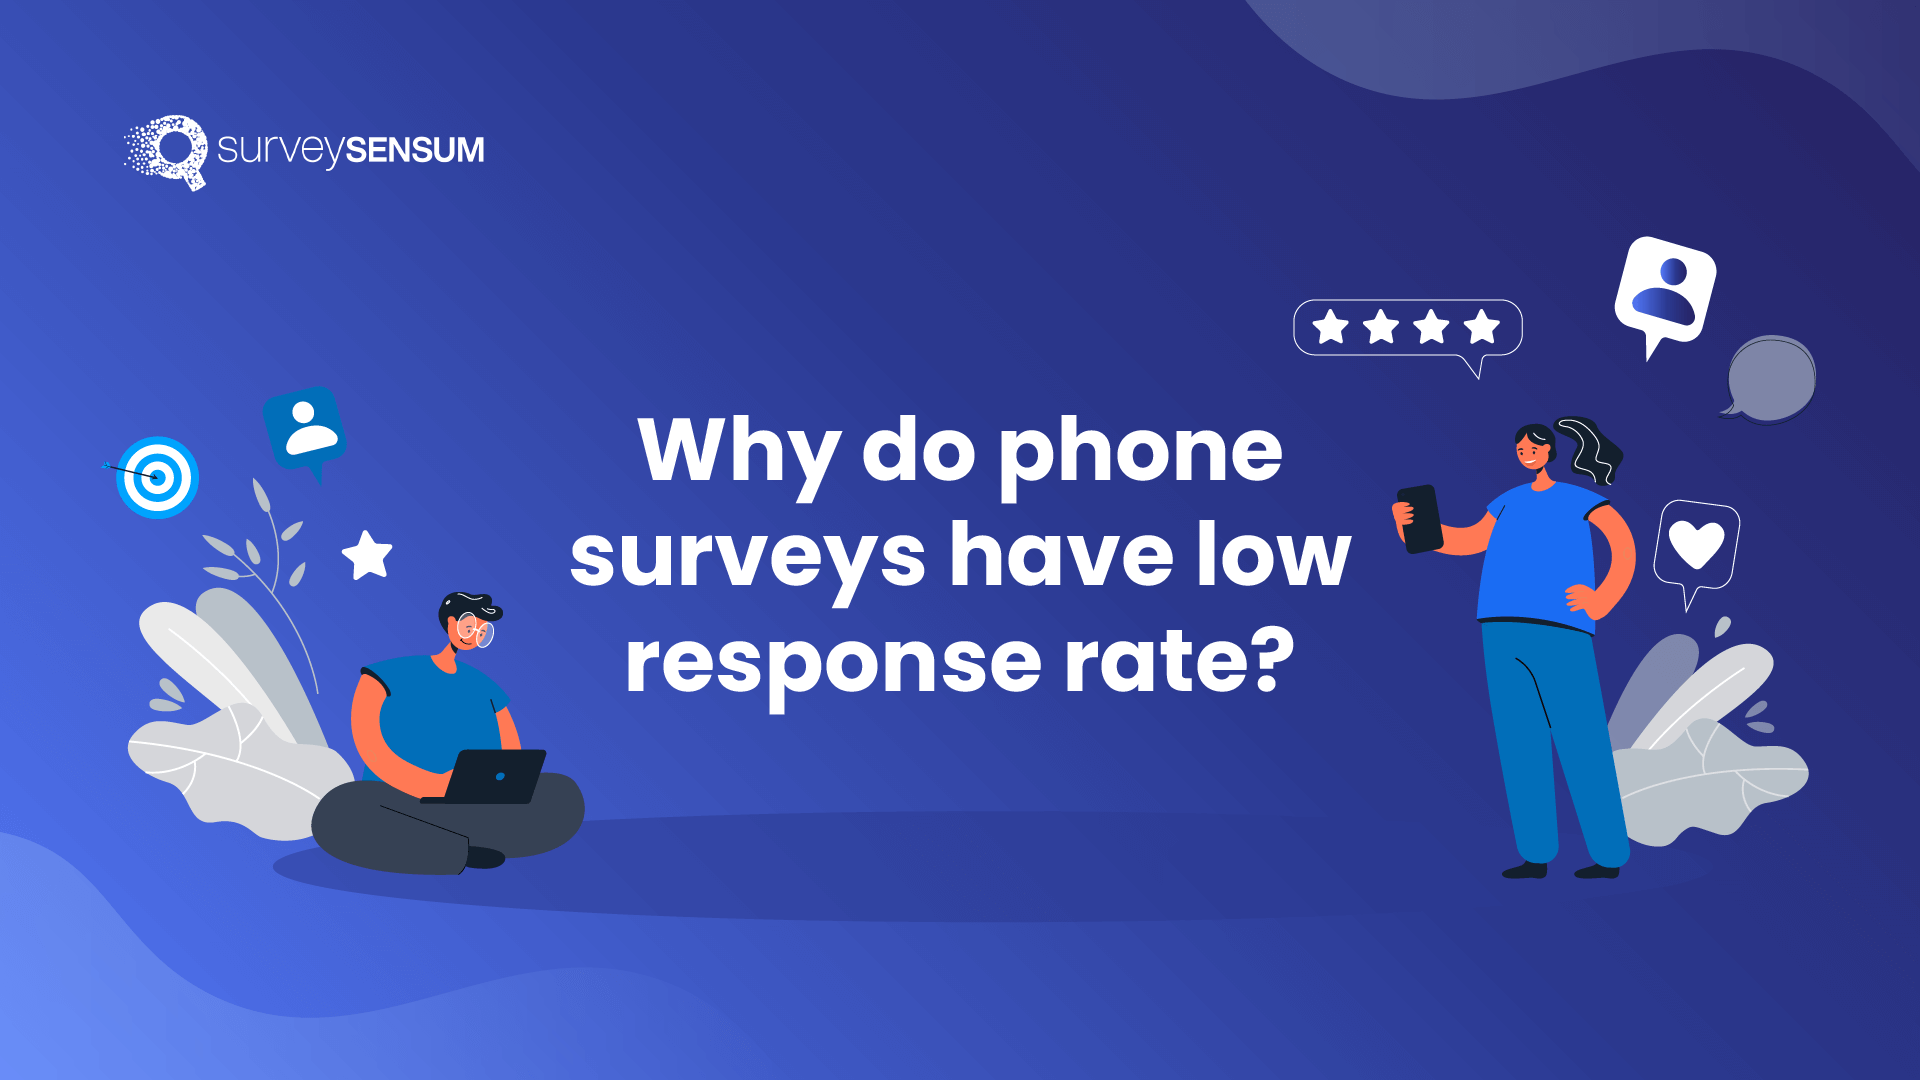 Why do phone surveys have a low response rate?